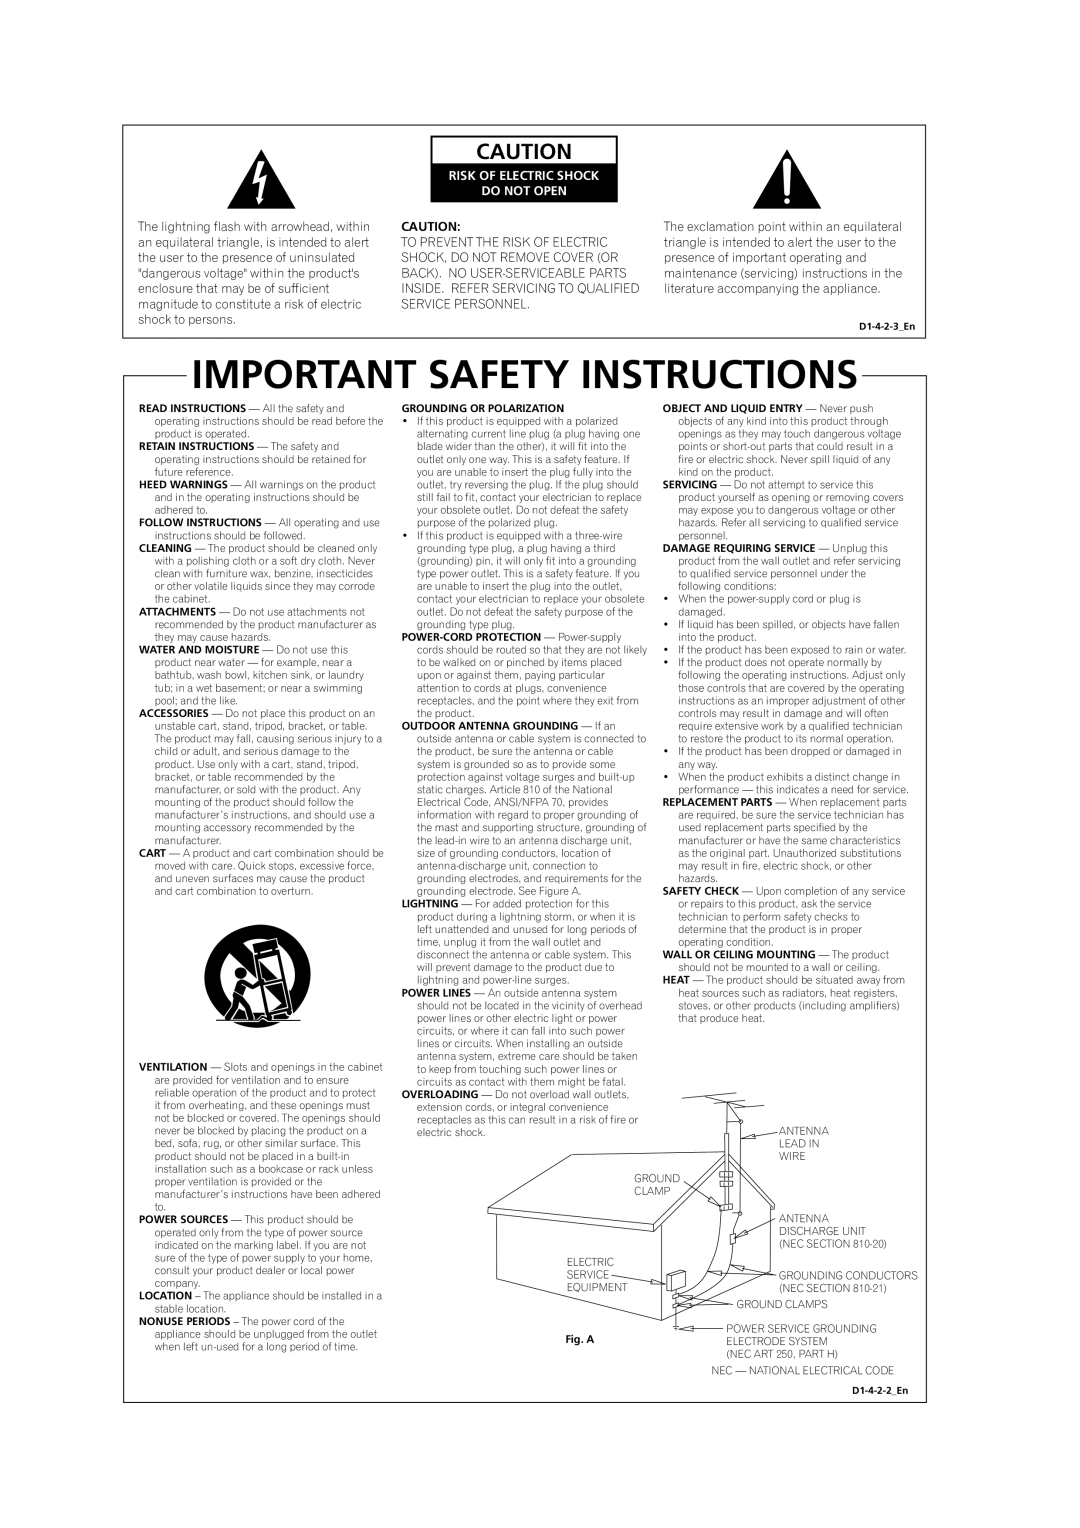 Pioneer VSX-9110TXV-K operating instructions Important Safety Instructions, Risk Of Electric Shock Do Not Open 